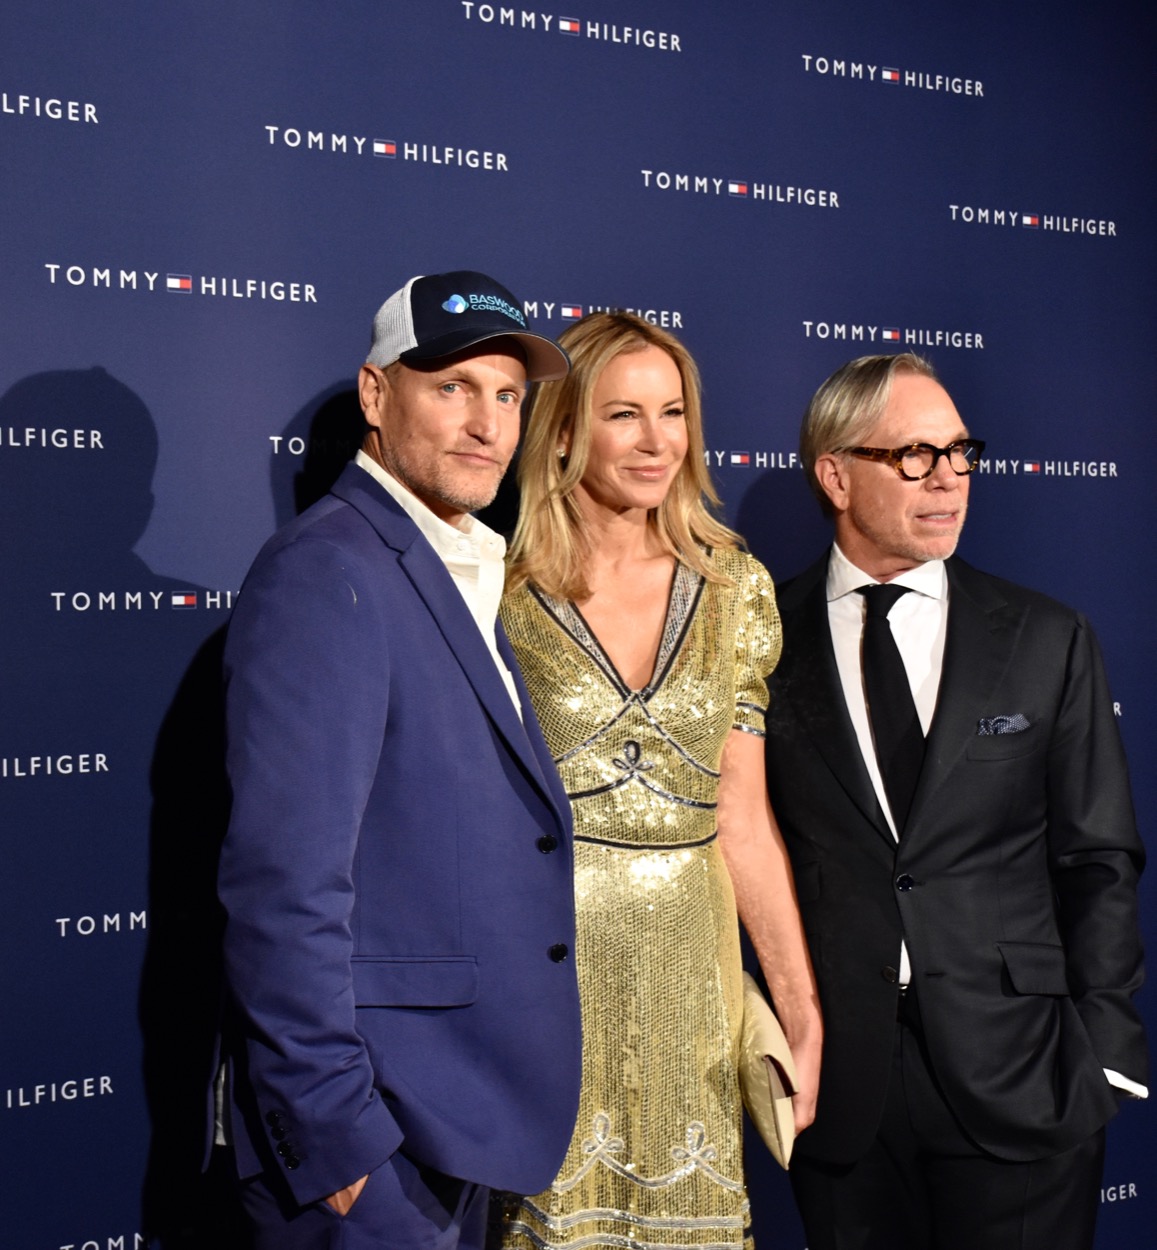 12th ZFF, Woody Harrelson is at the Tommy Hilfiger party with Tommy Hilfiger